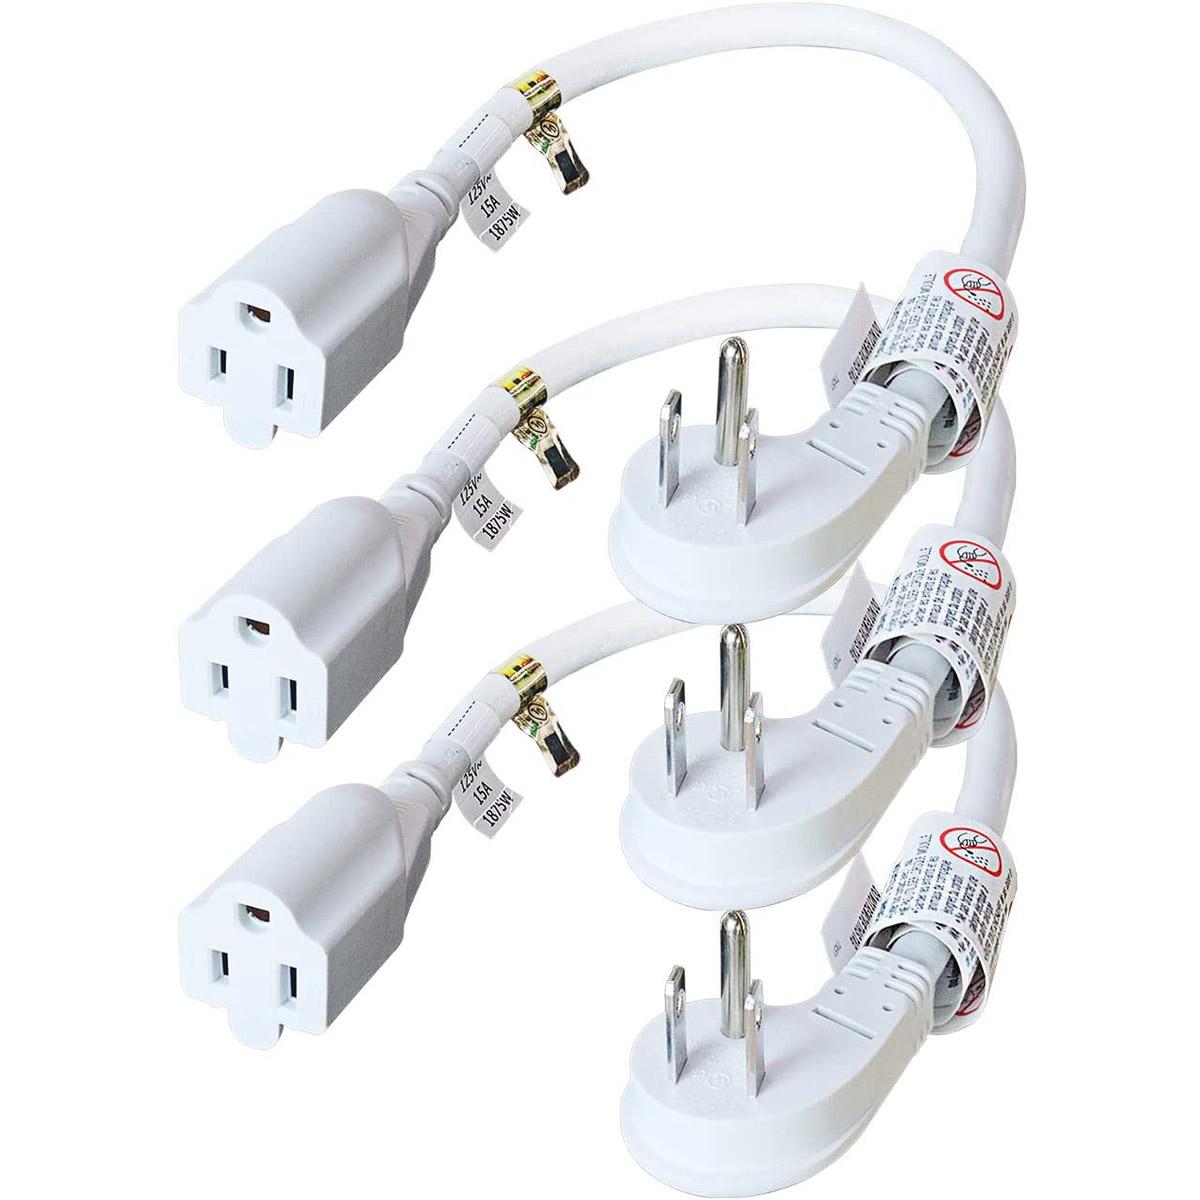 3 Firmerst Flat Plug Extension Cords for $8.83